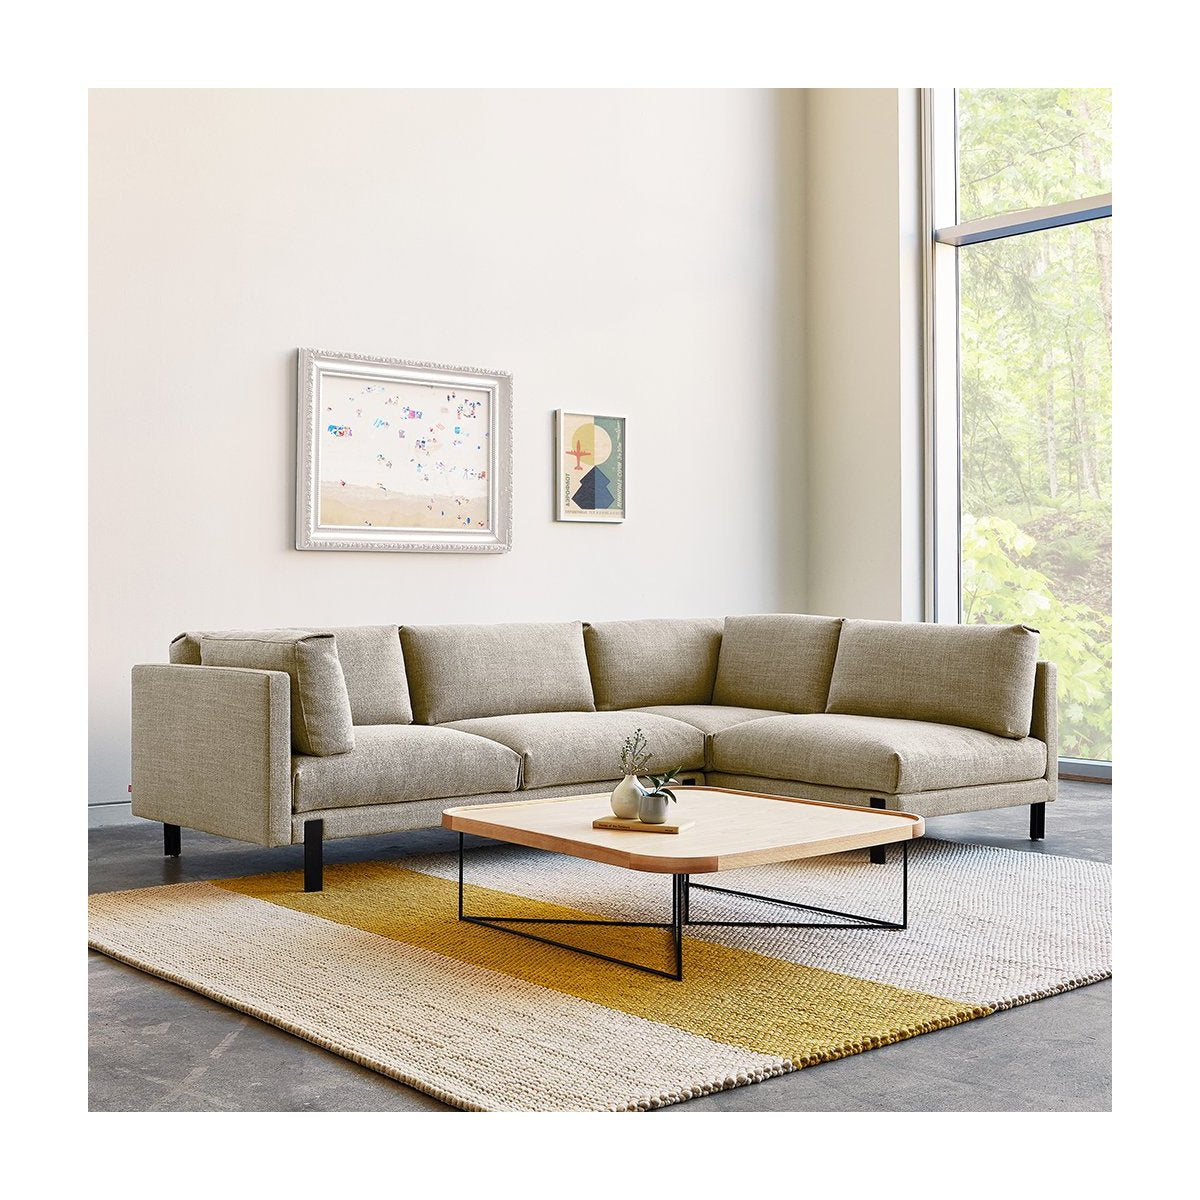 Load image into Gallery viewer, Silverlake Sectional Right Facing Sectional Sofa Gus*     Four Hands, Burke Decor, Mid Century Modern Furniture, Old Bones Furniture Company, Old Bones Co, Modern Mid Century, Designer Furniture, https://www.oldbonesco.com/
